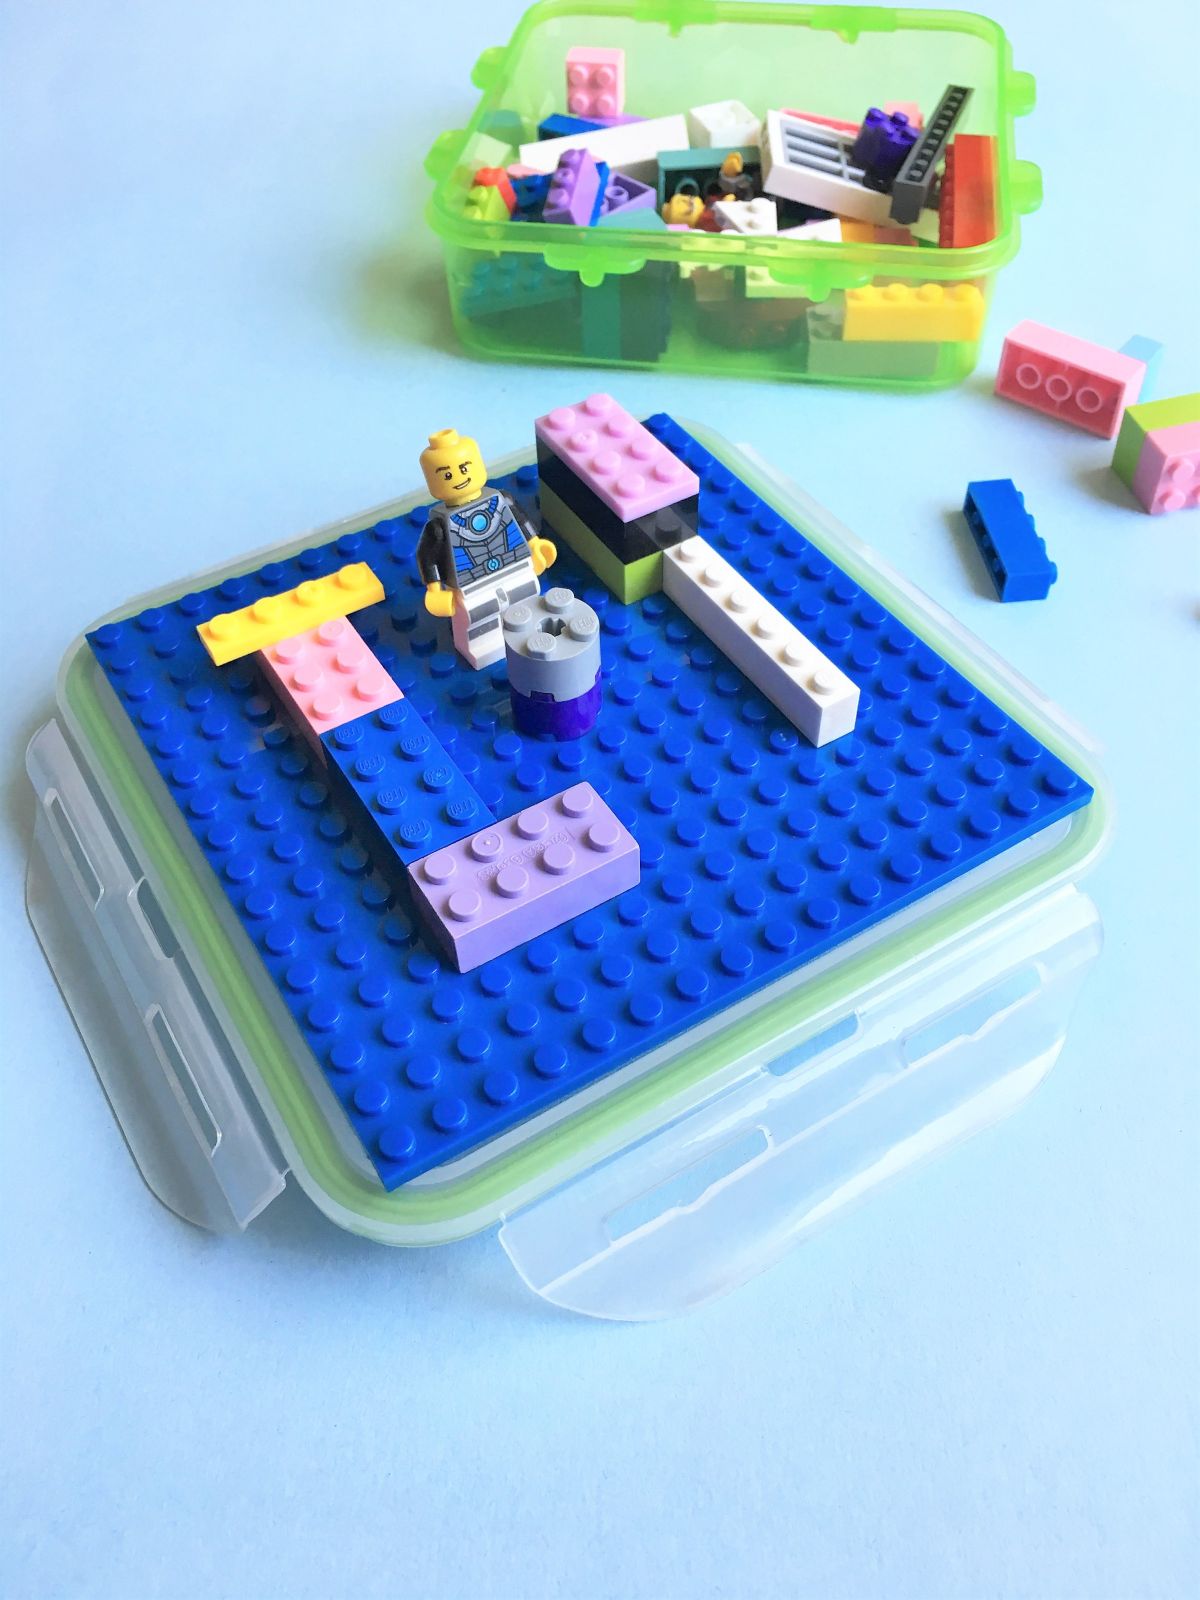 a tupperware container holds mixed lego pieces. in the foreground is the container lid with a lego base and some lego pieces on it